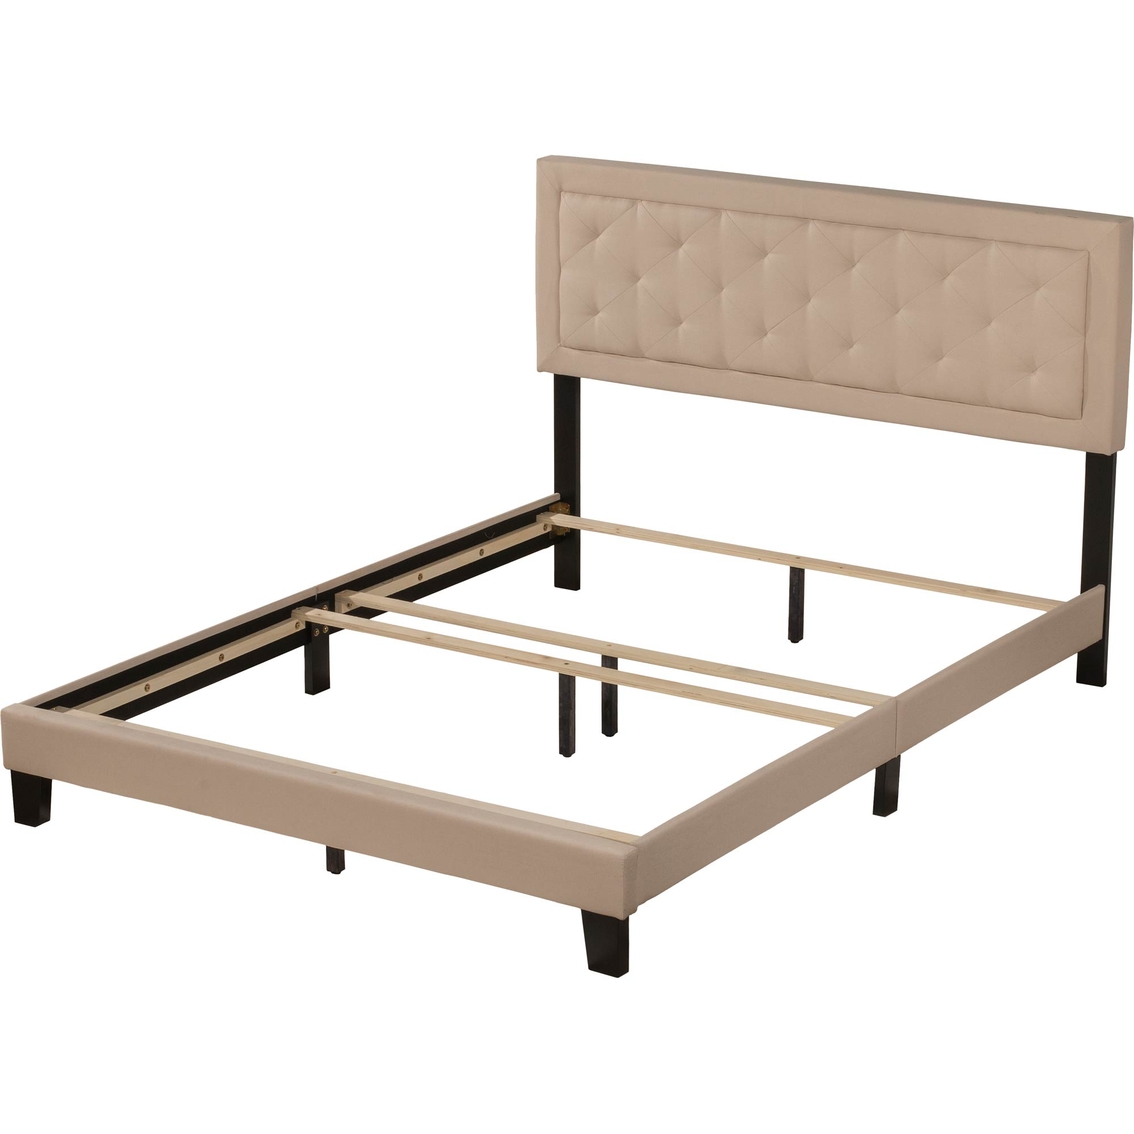 Hillsdale La Croix Bed in One - Image 7 of 7